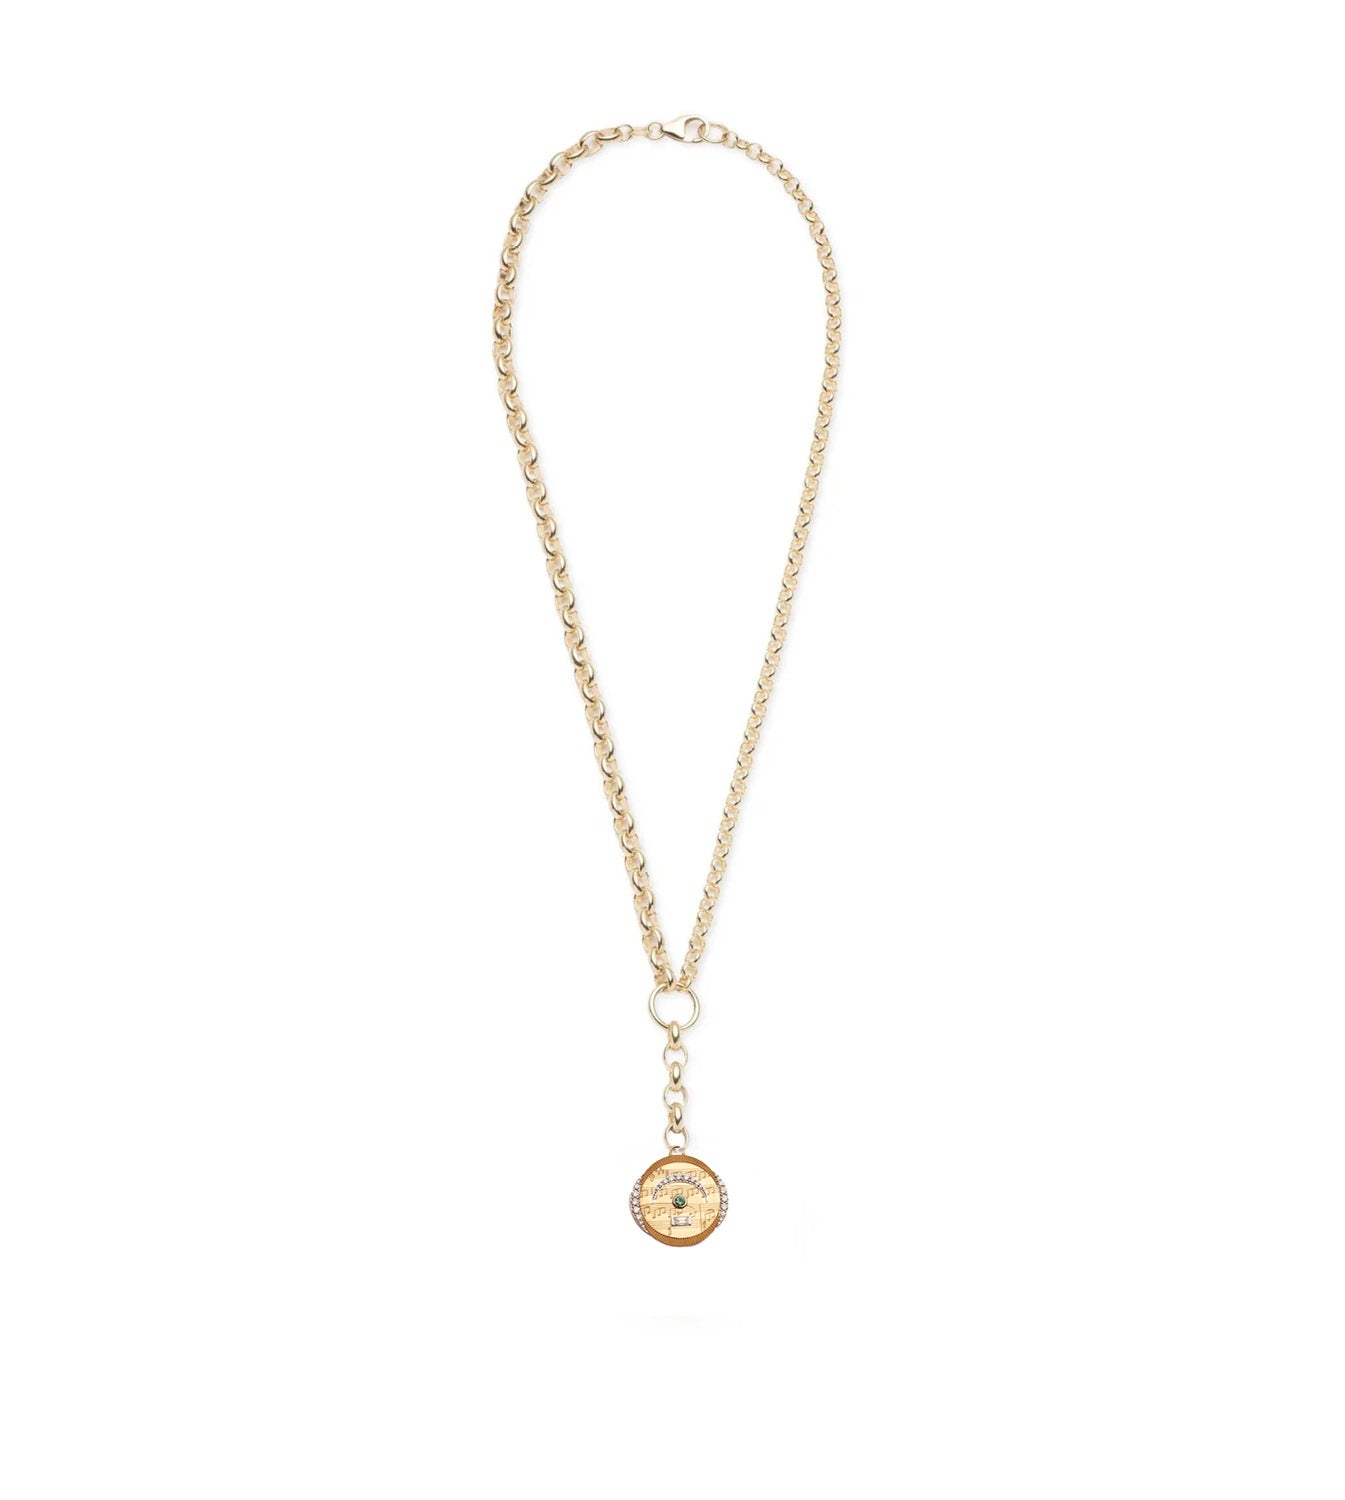 Pause - Internal Compass : Heavy Mixed Belcher Extension Chain Necklace